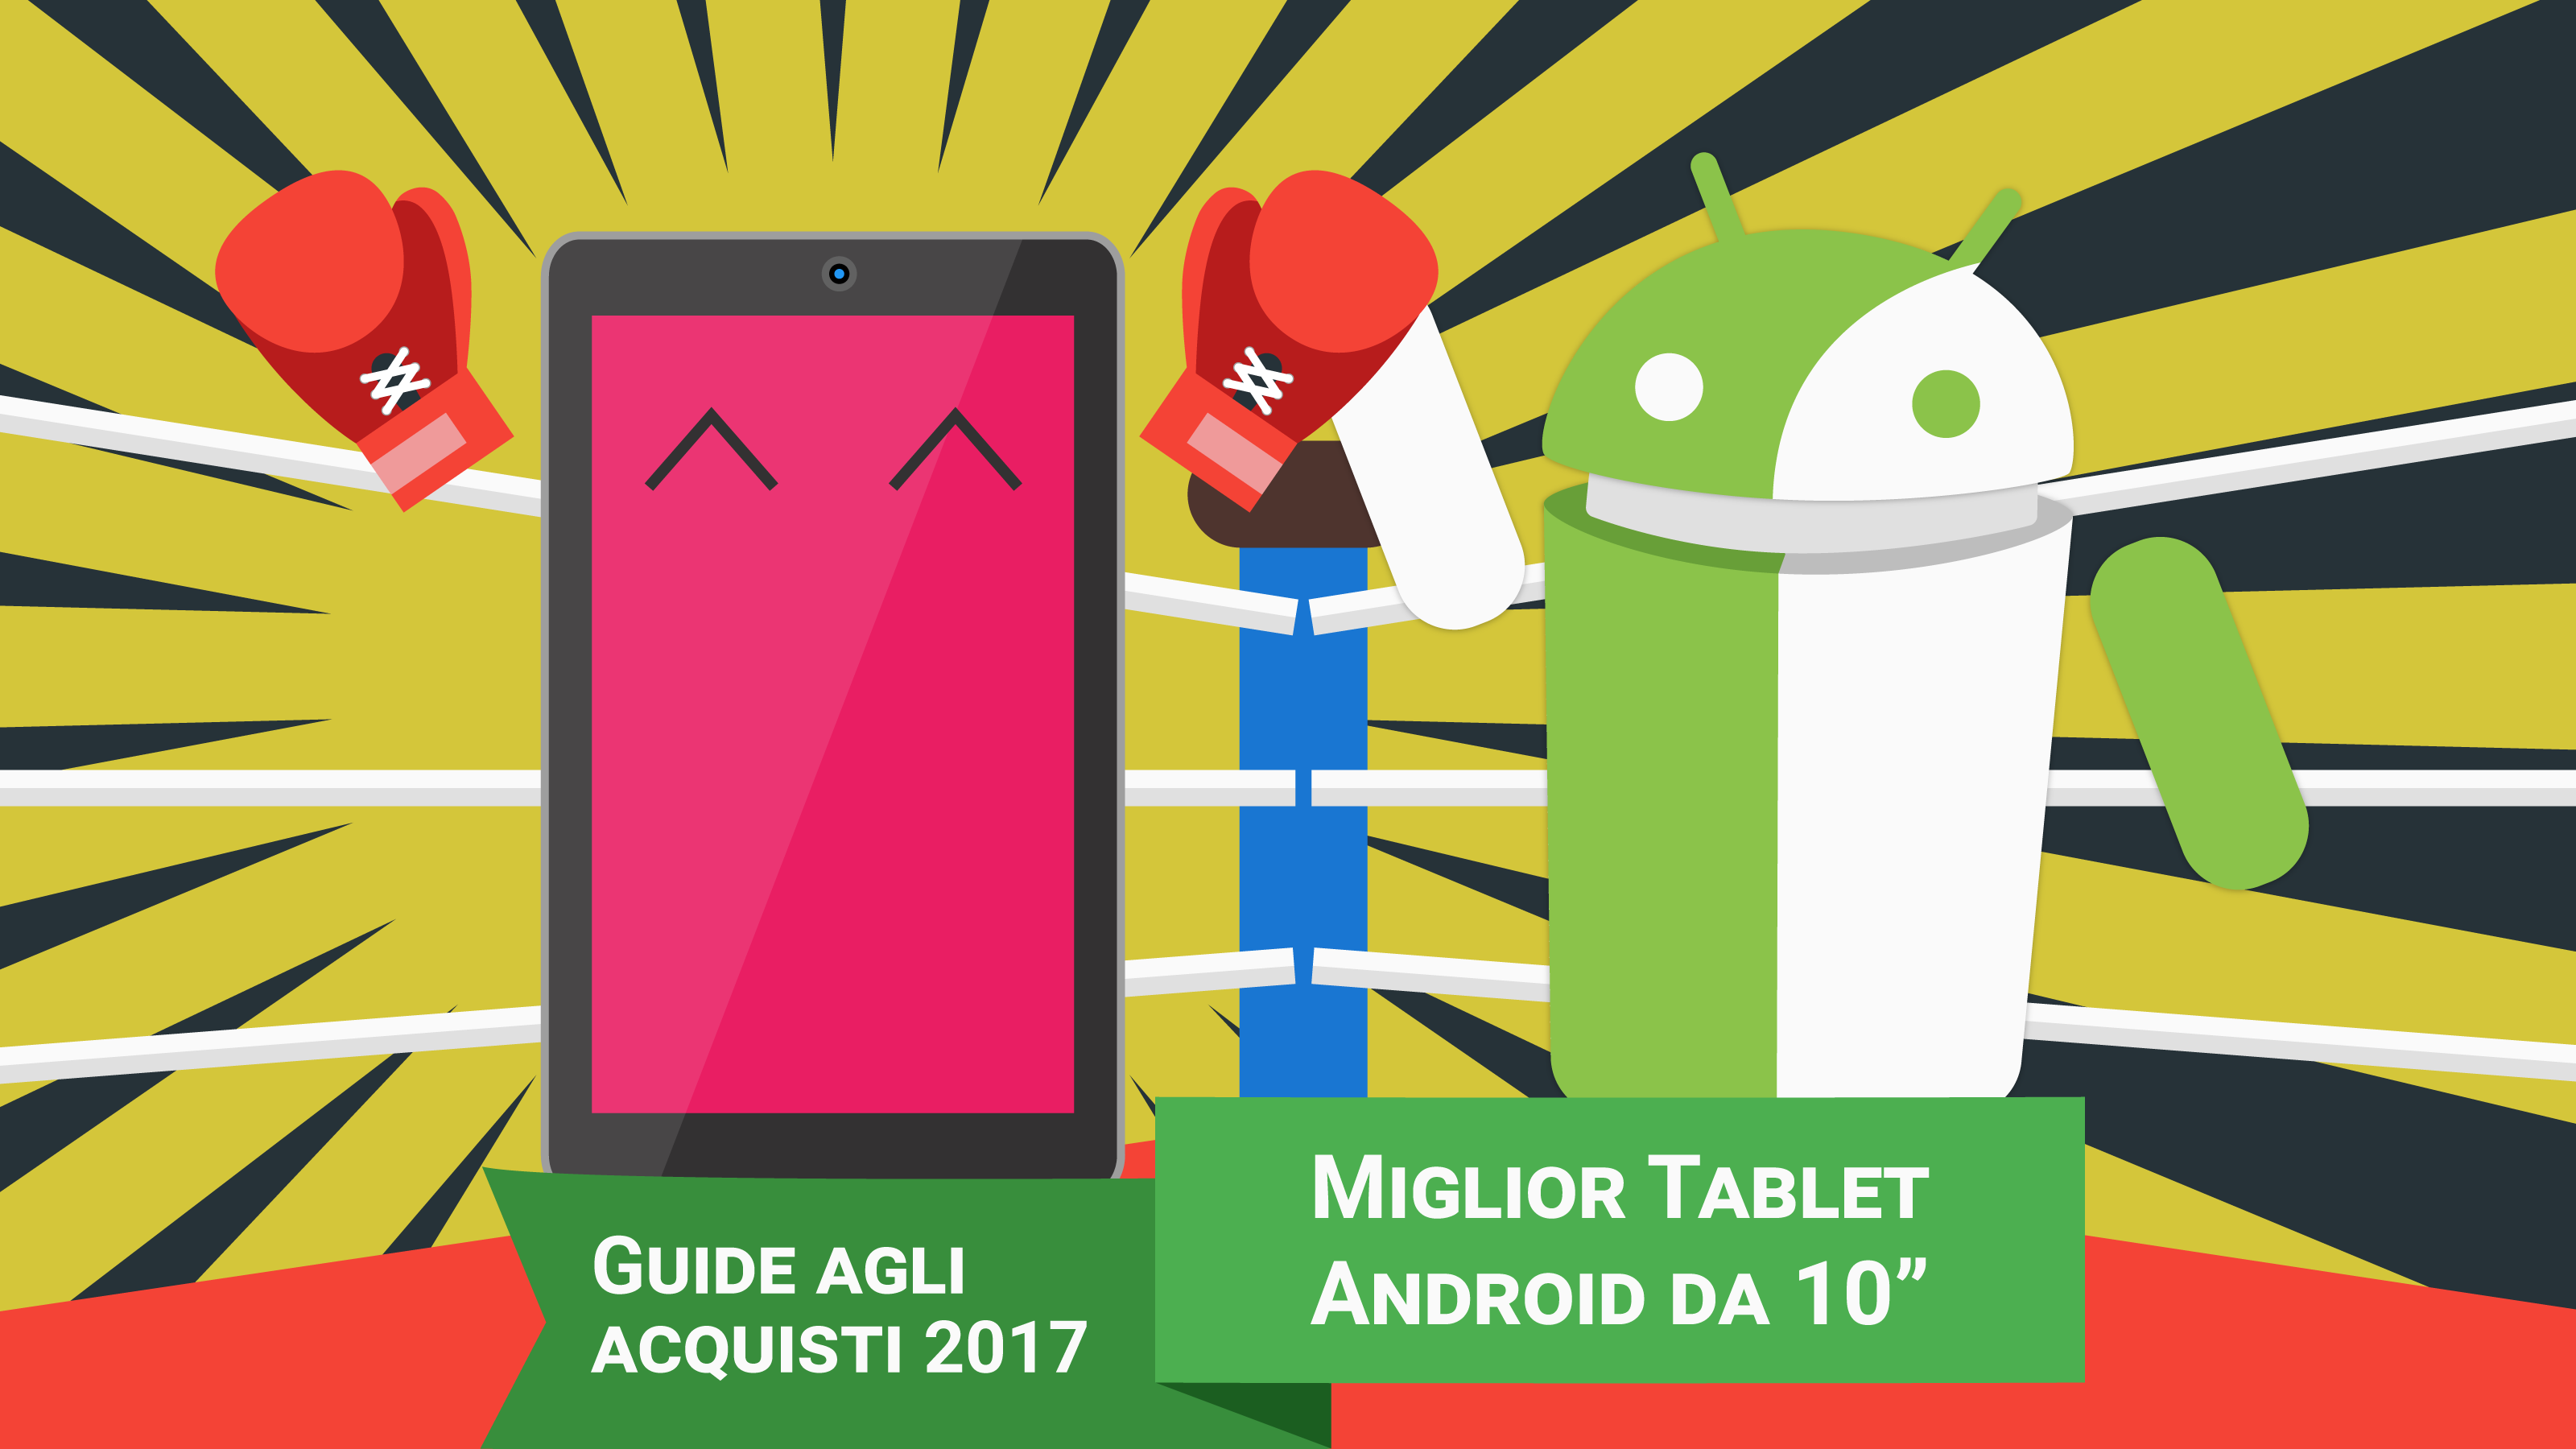 Miglior Tablet Android da 10 pollici | Marzo 2017 Miglior-tablet-android-10